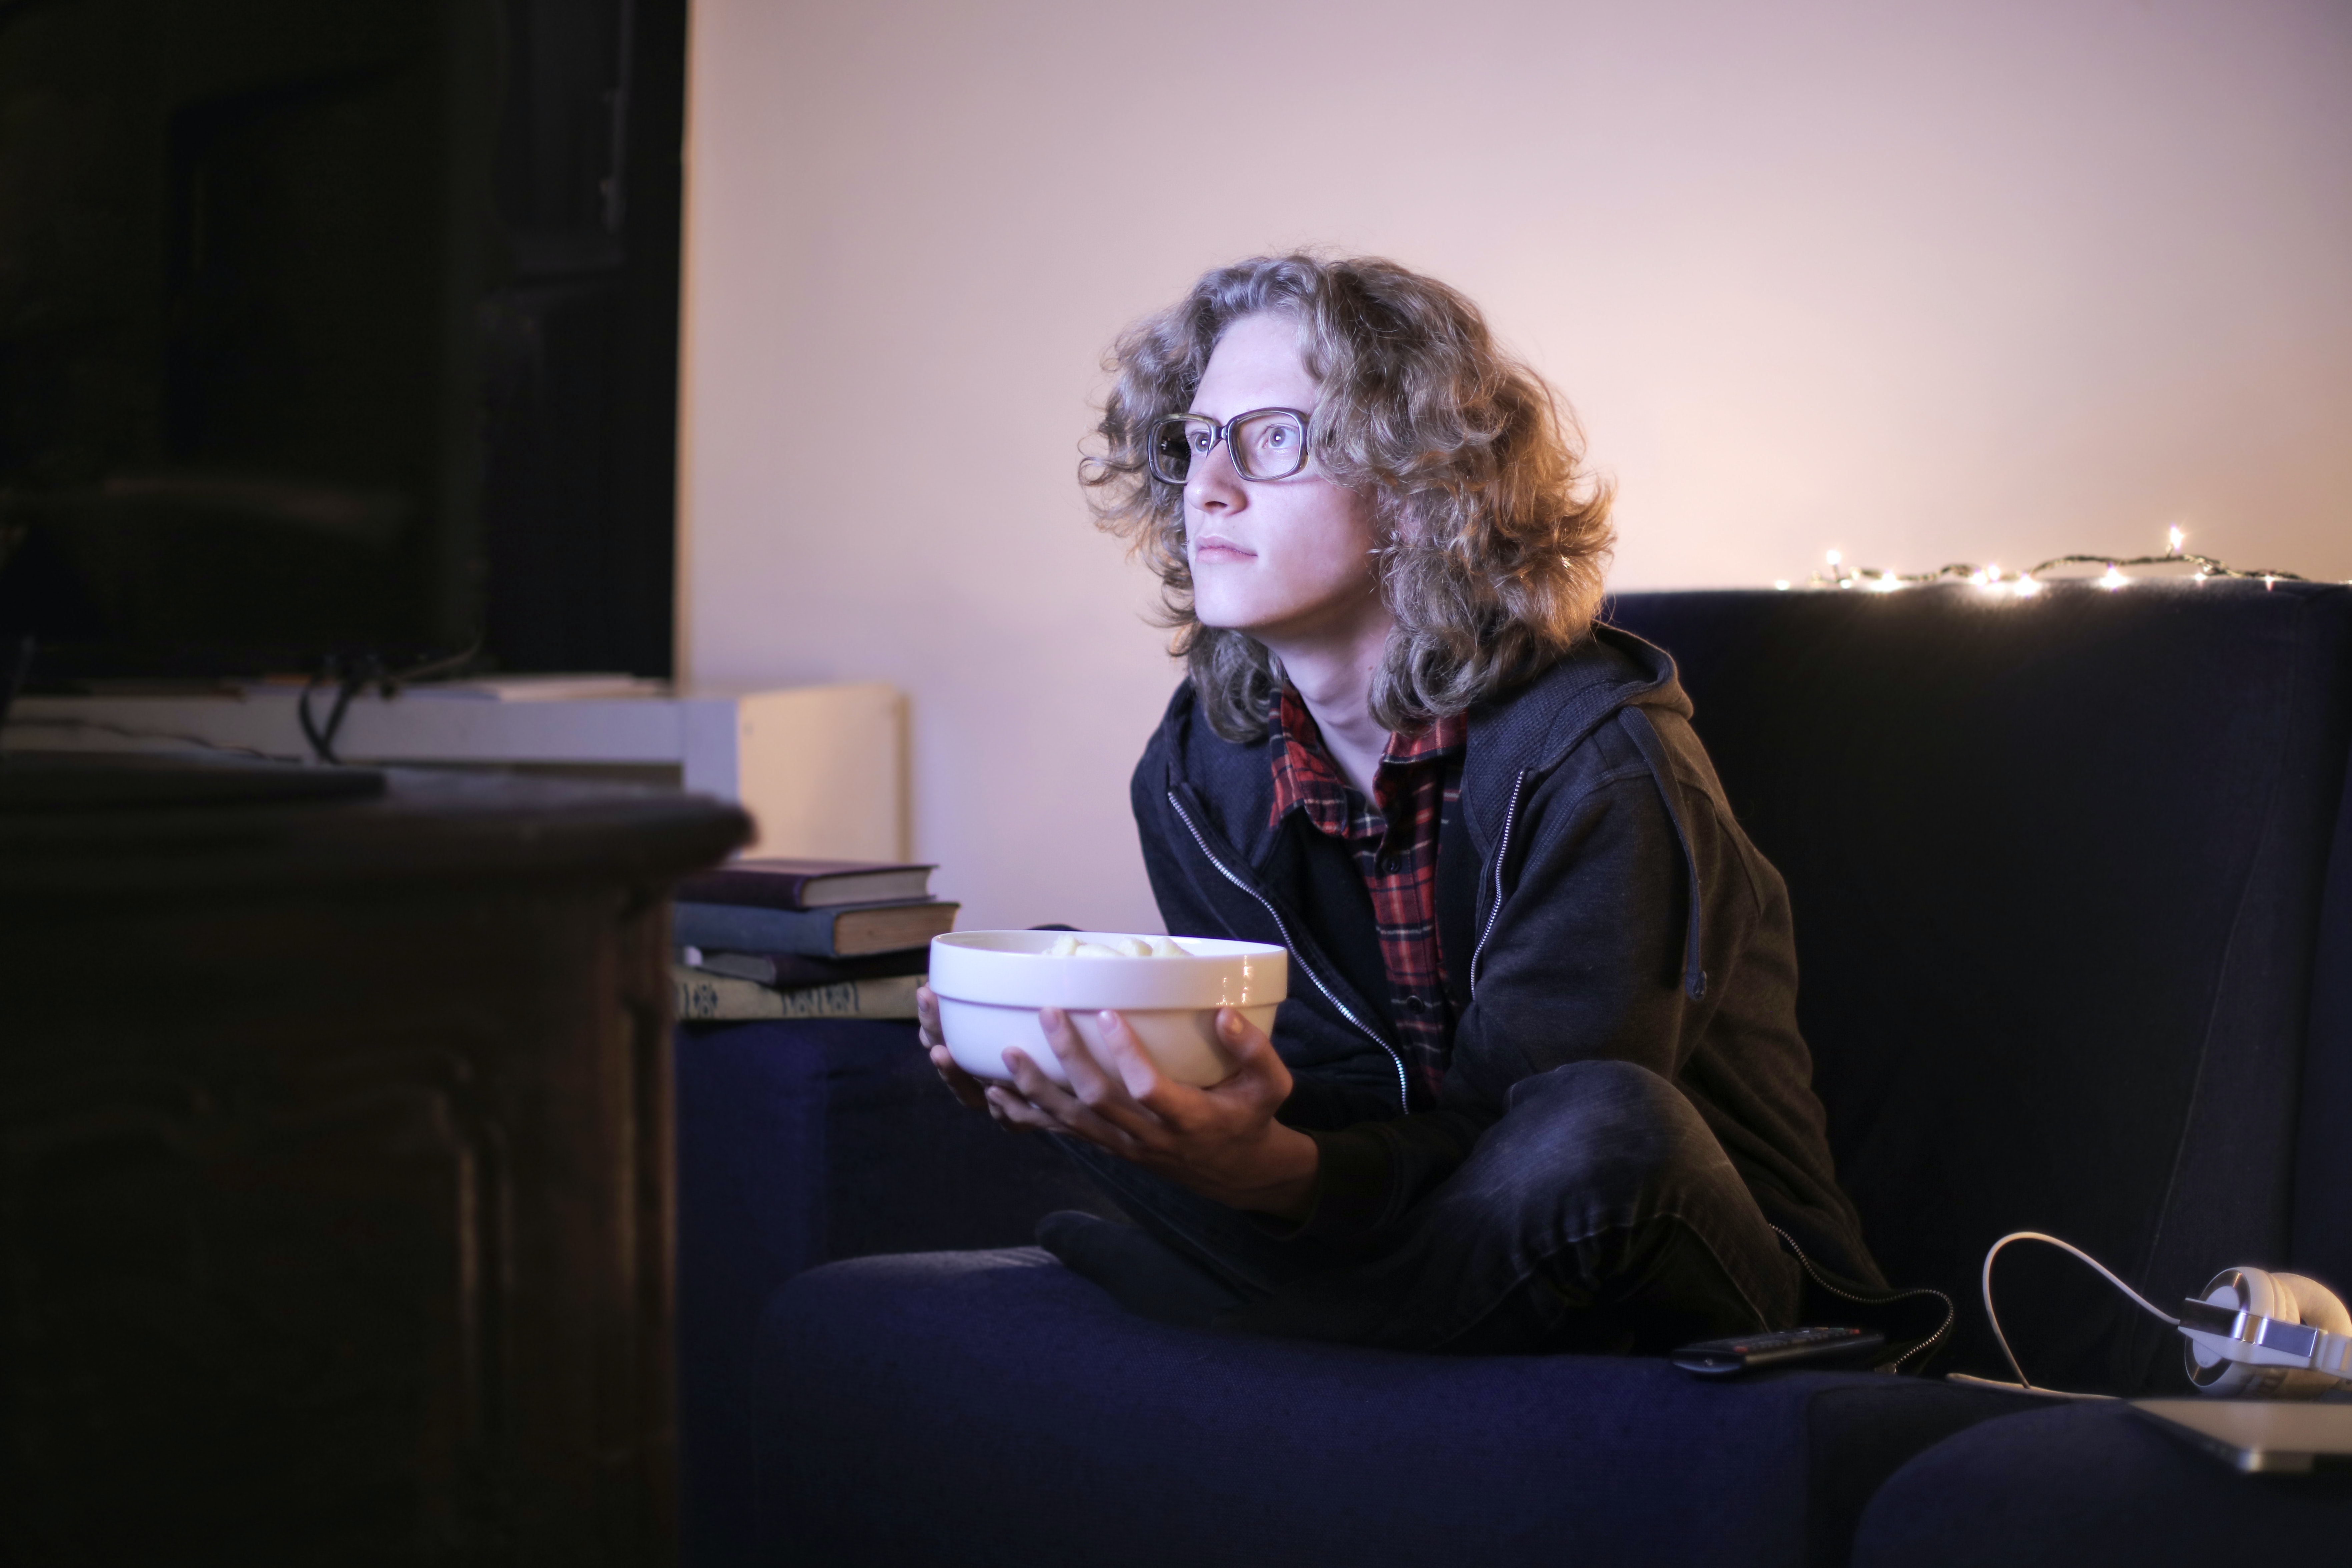 Image of a young white man with long hair and glasses looking intently at the t.v with a bowl of popcorn in his hands.